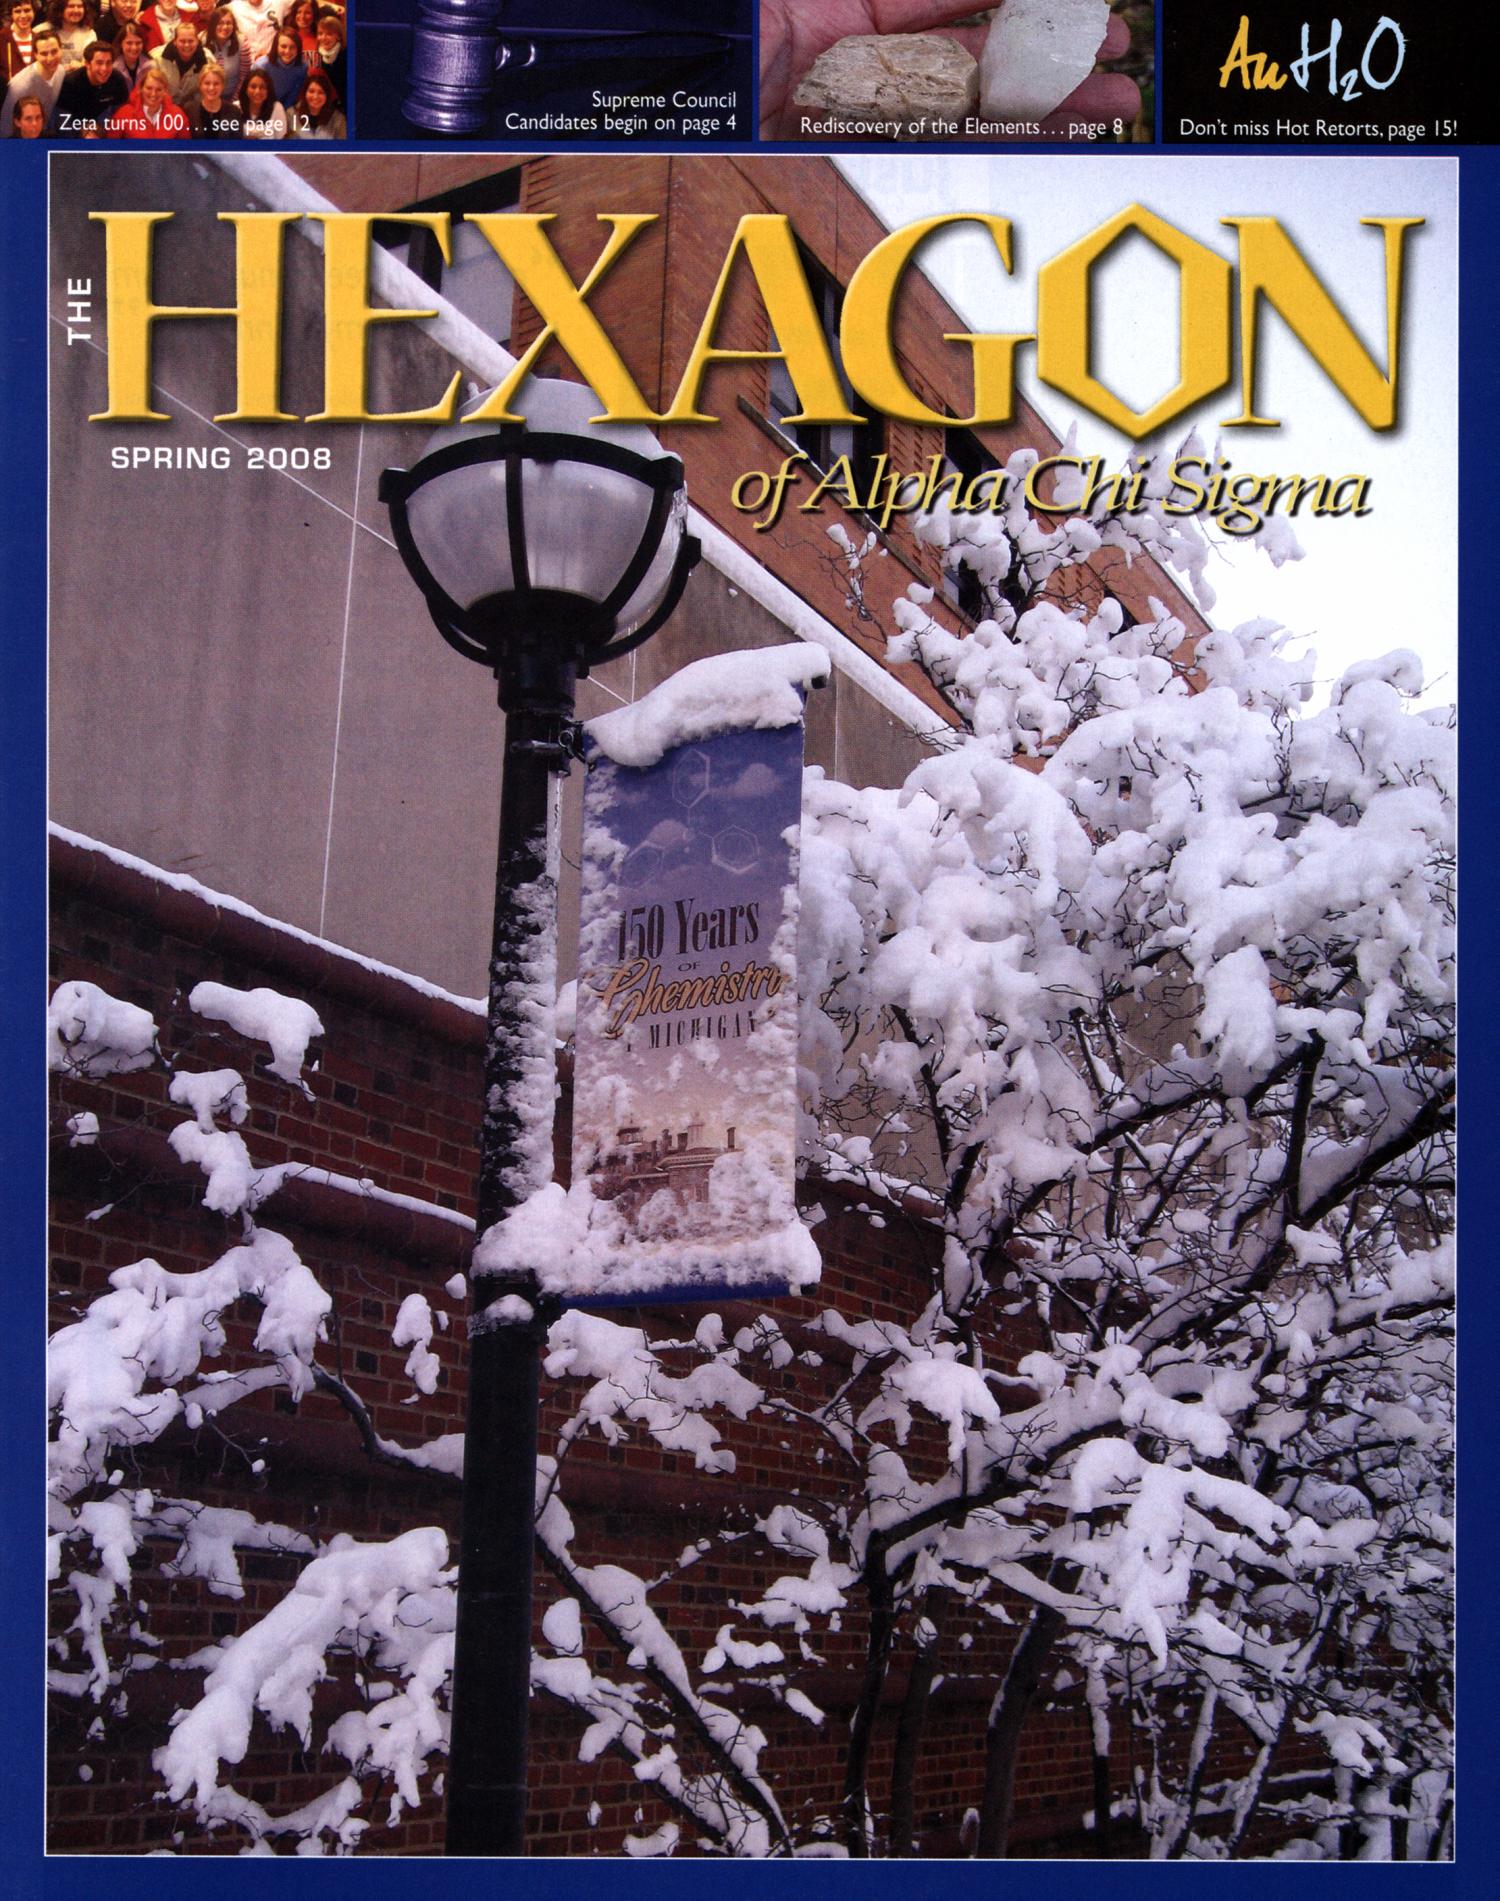 The Hexagon, Volume 99, Number 1, Spring 2008
                                                
                                                    1
                                                